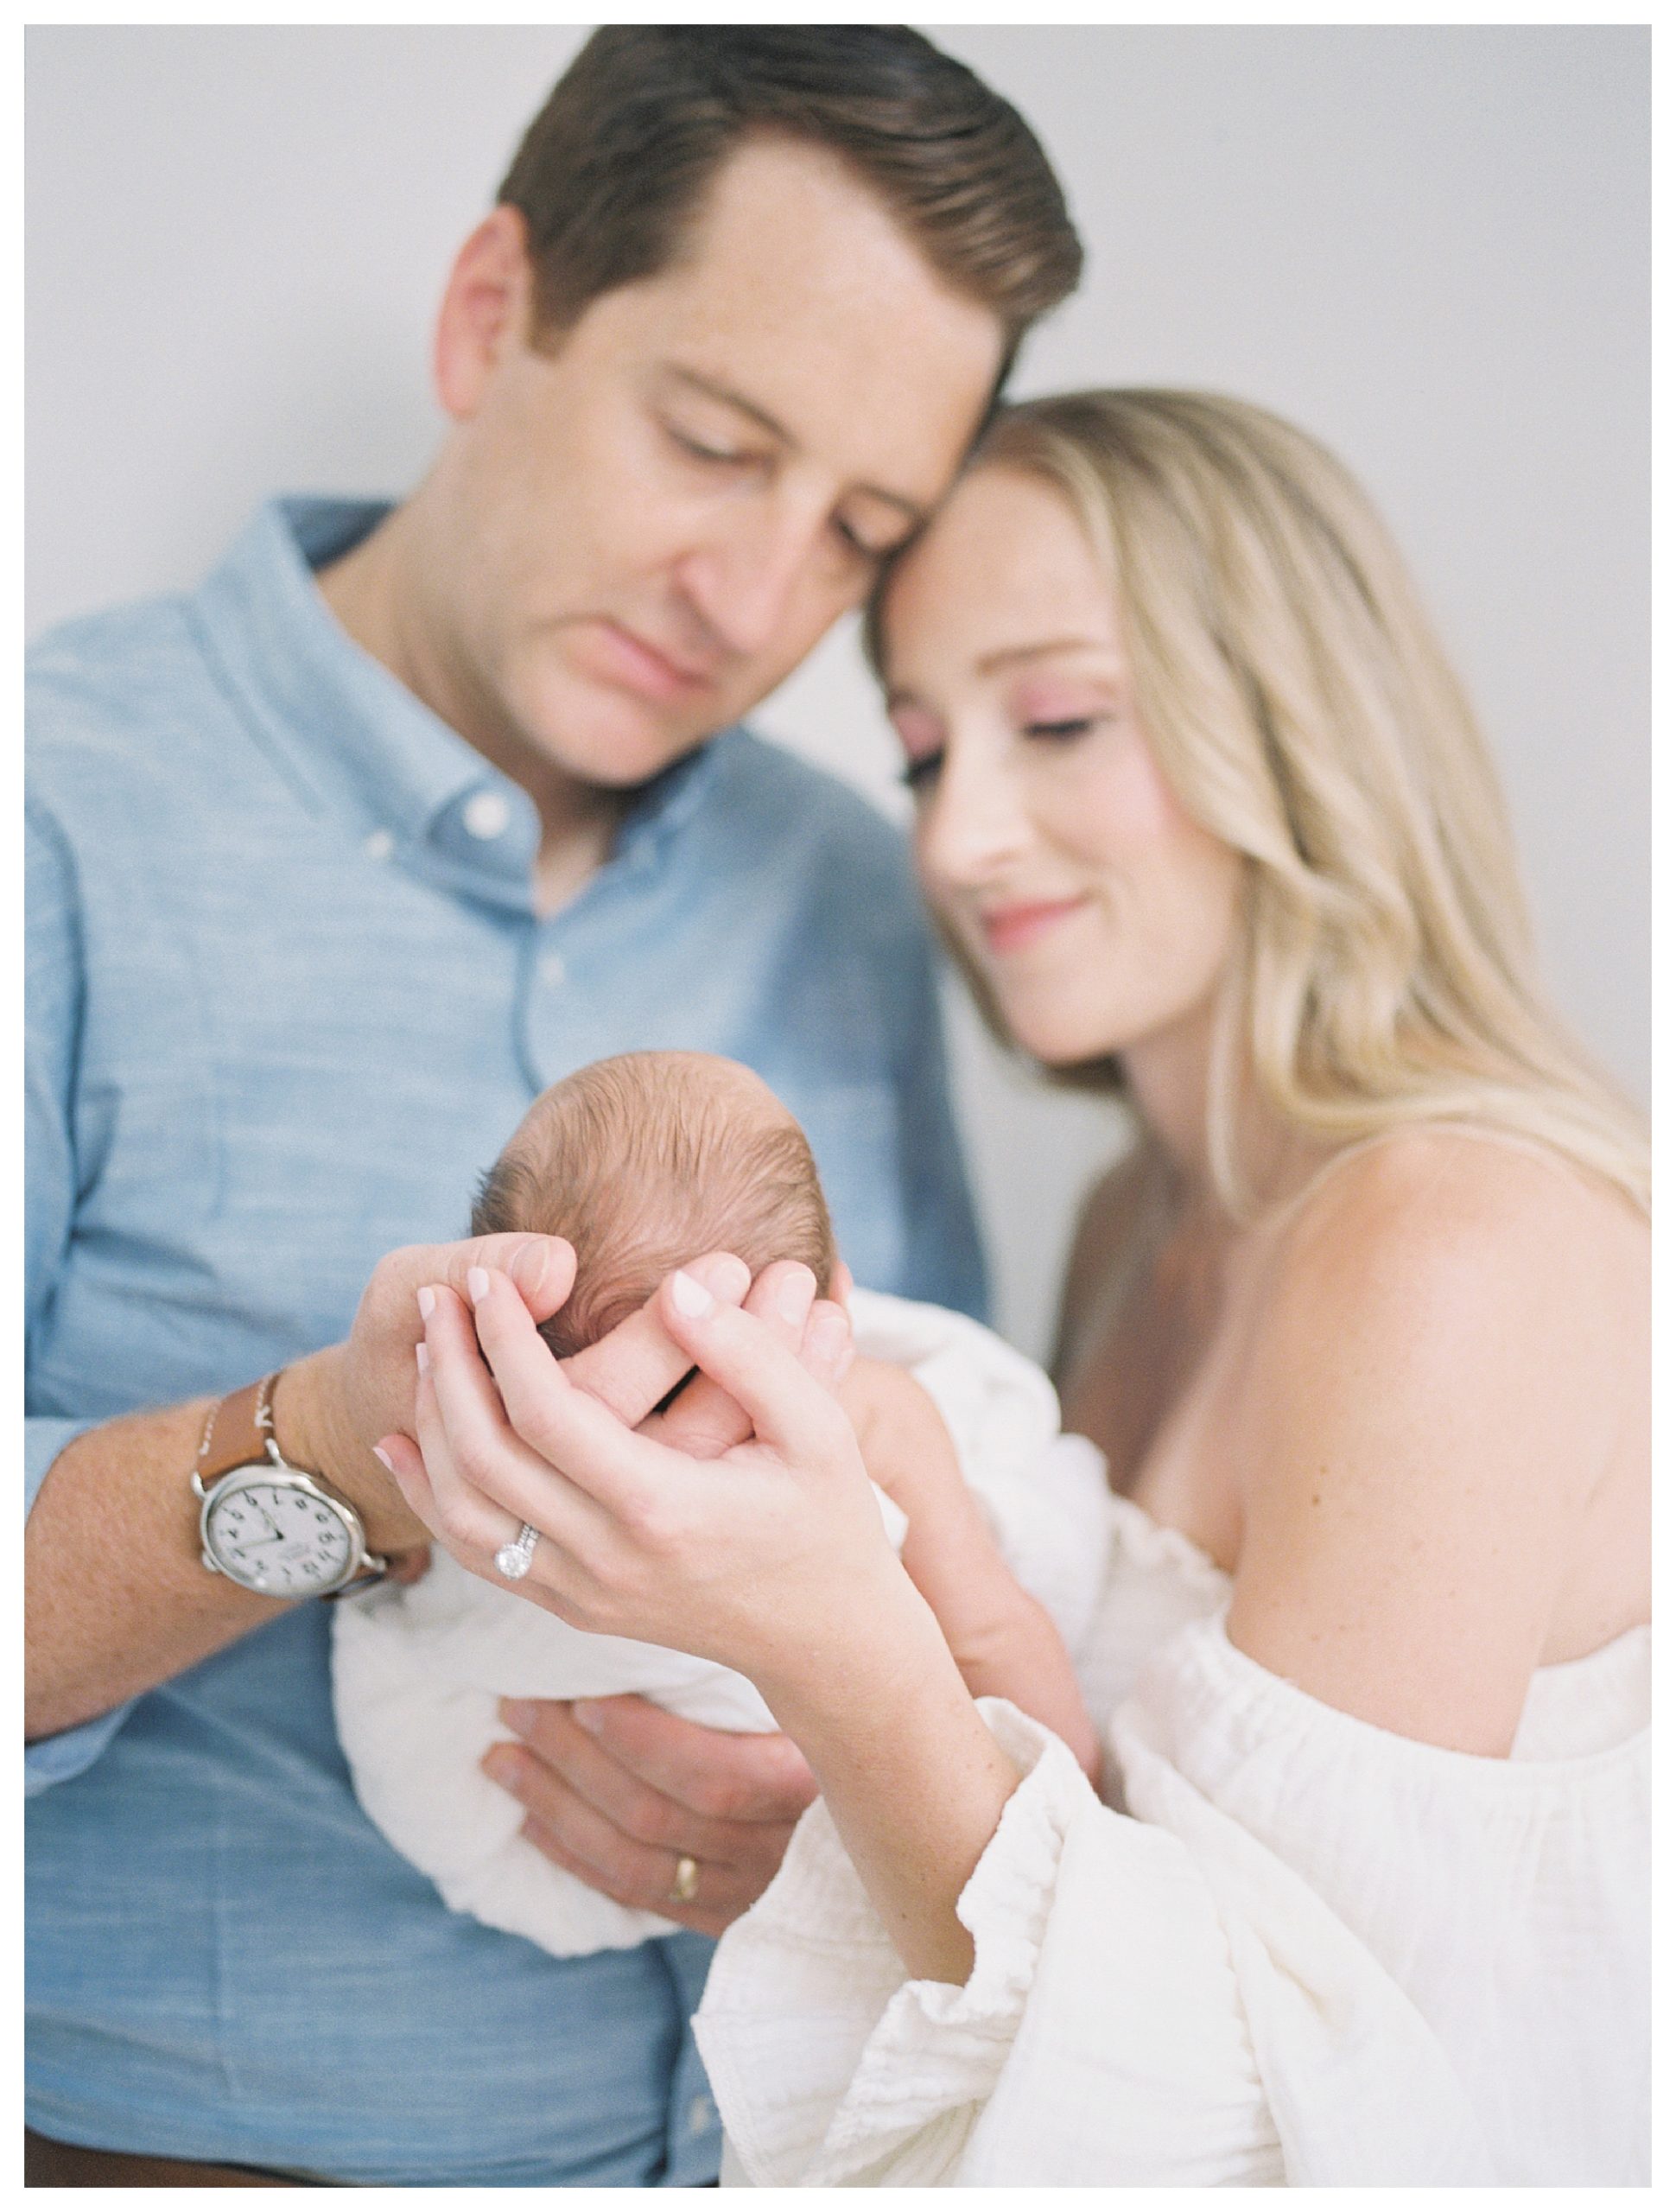 Newborn baby held by admiring mother and father during DC newborn session.